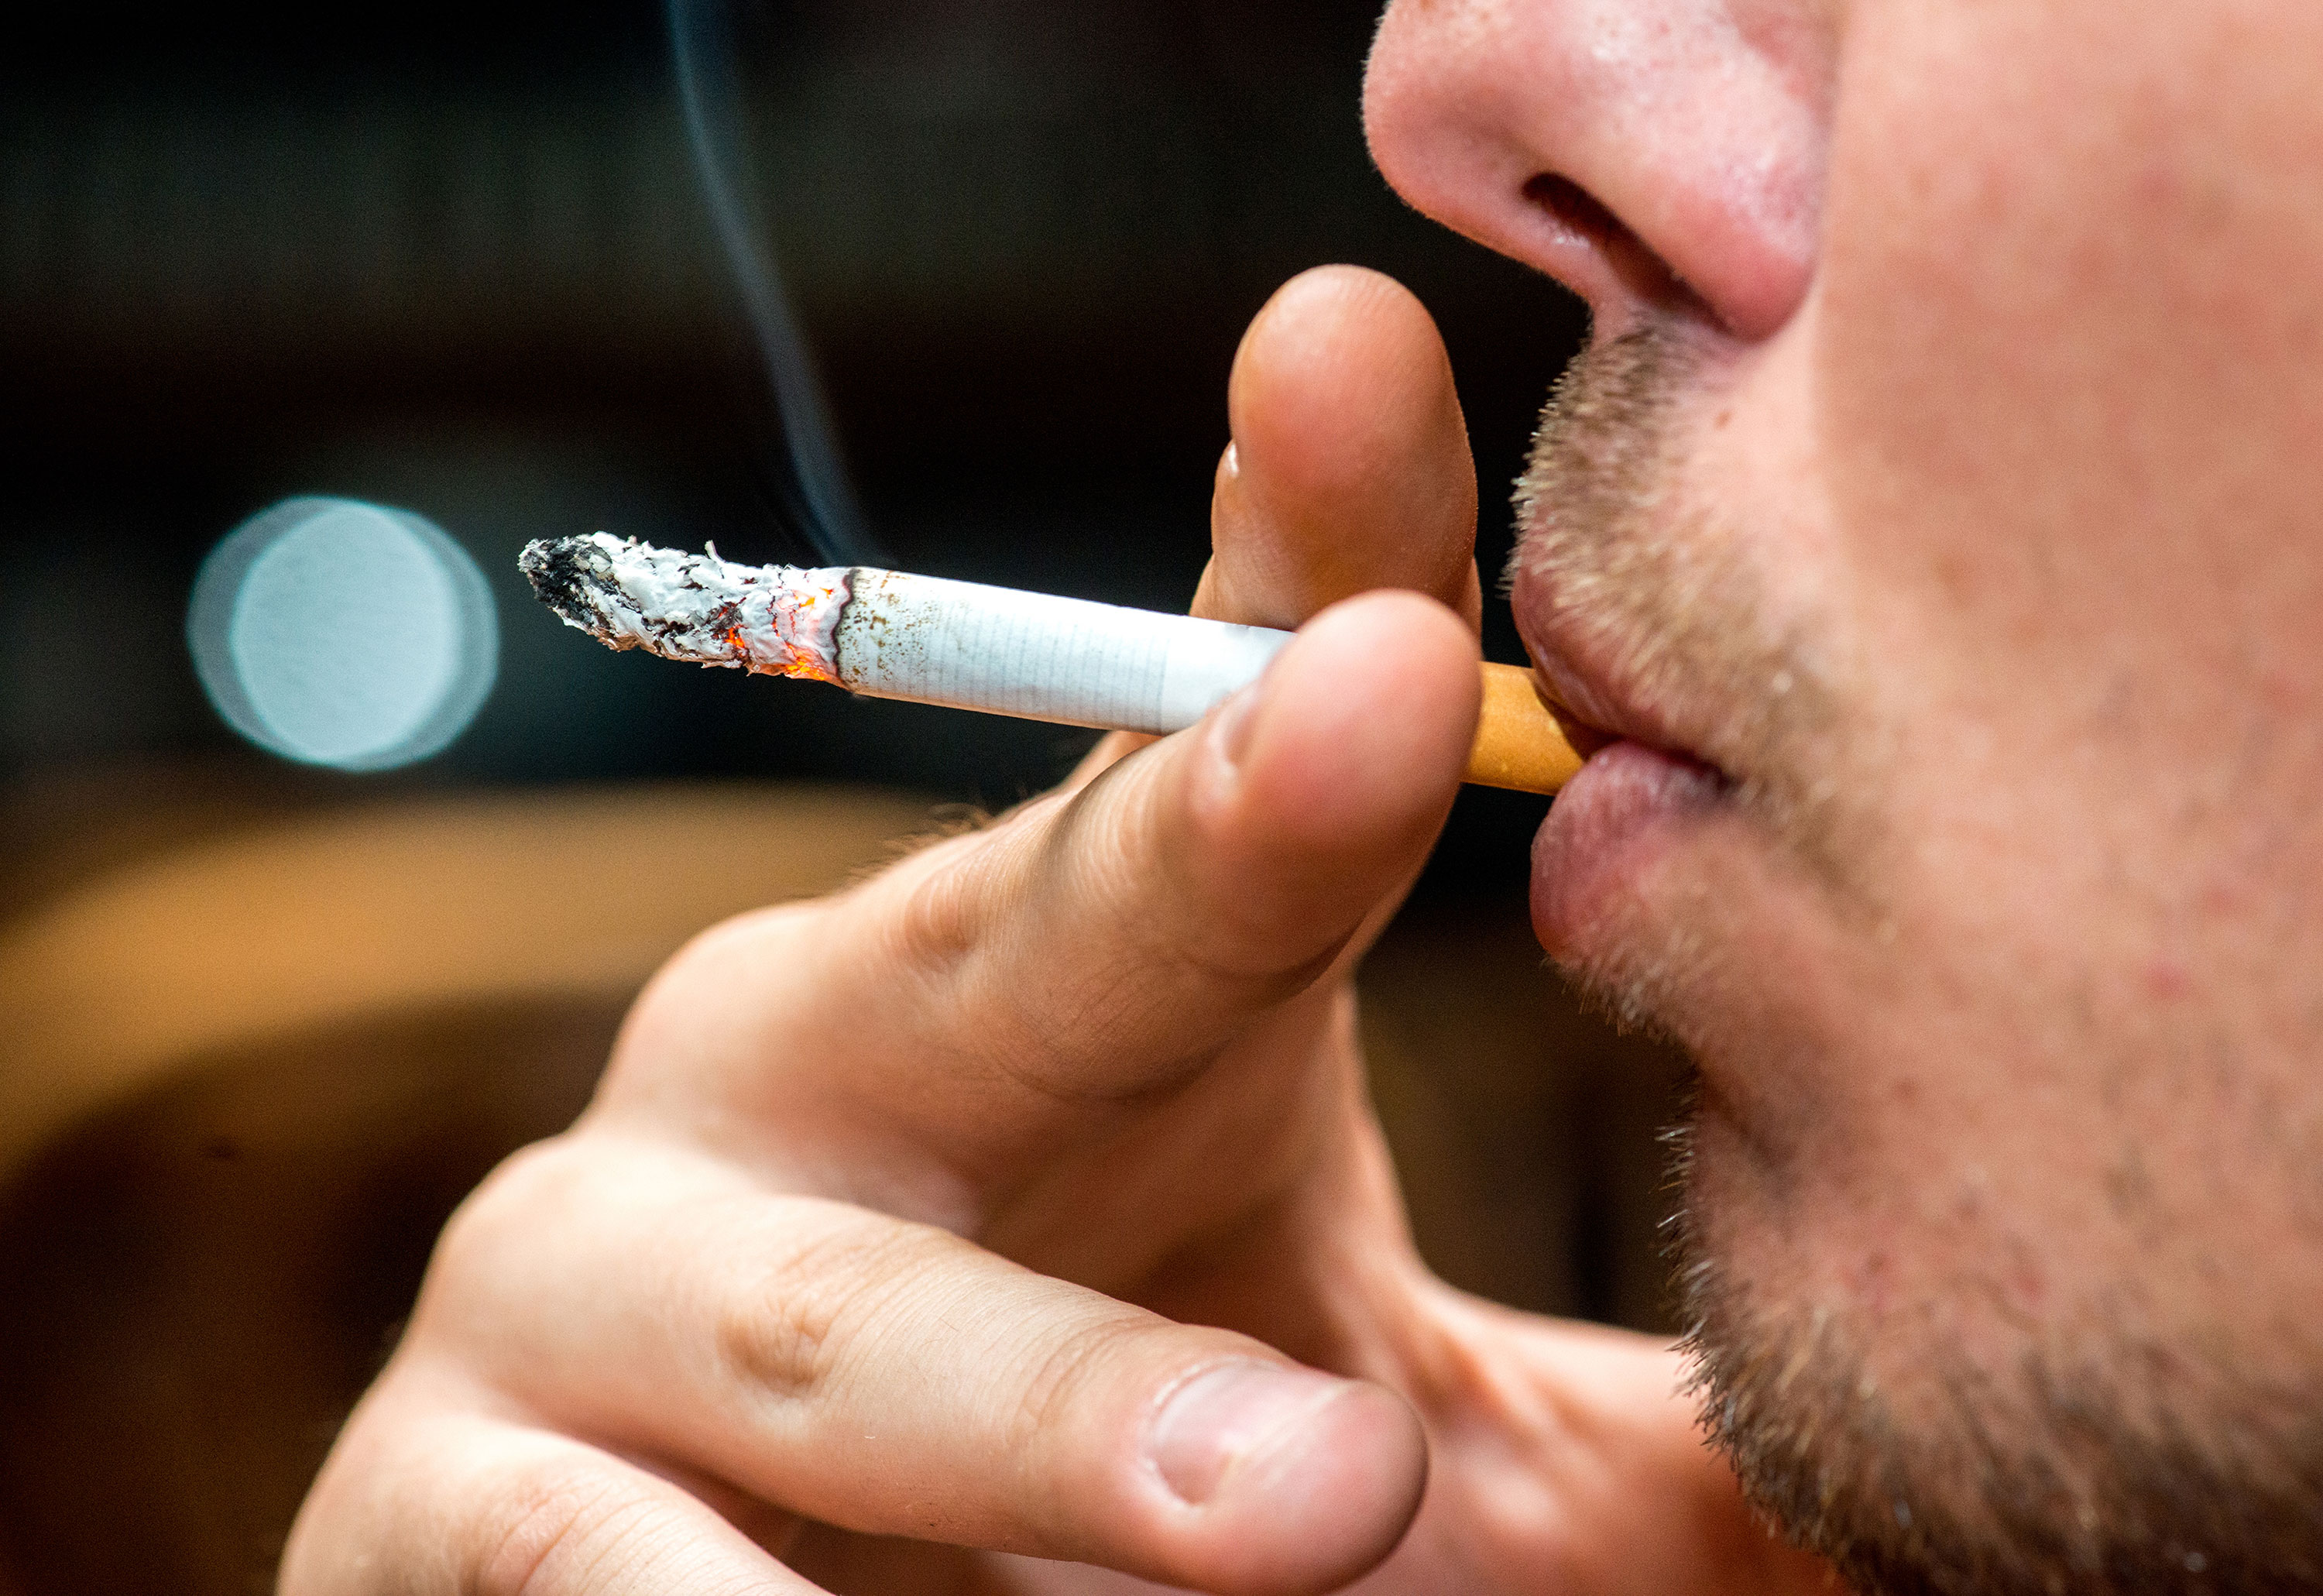 Smokers have a greater risk of developing severe cases of Covid-19 and dying from the illness, according to a new study.